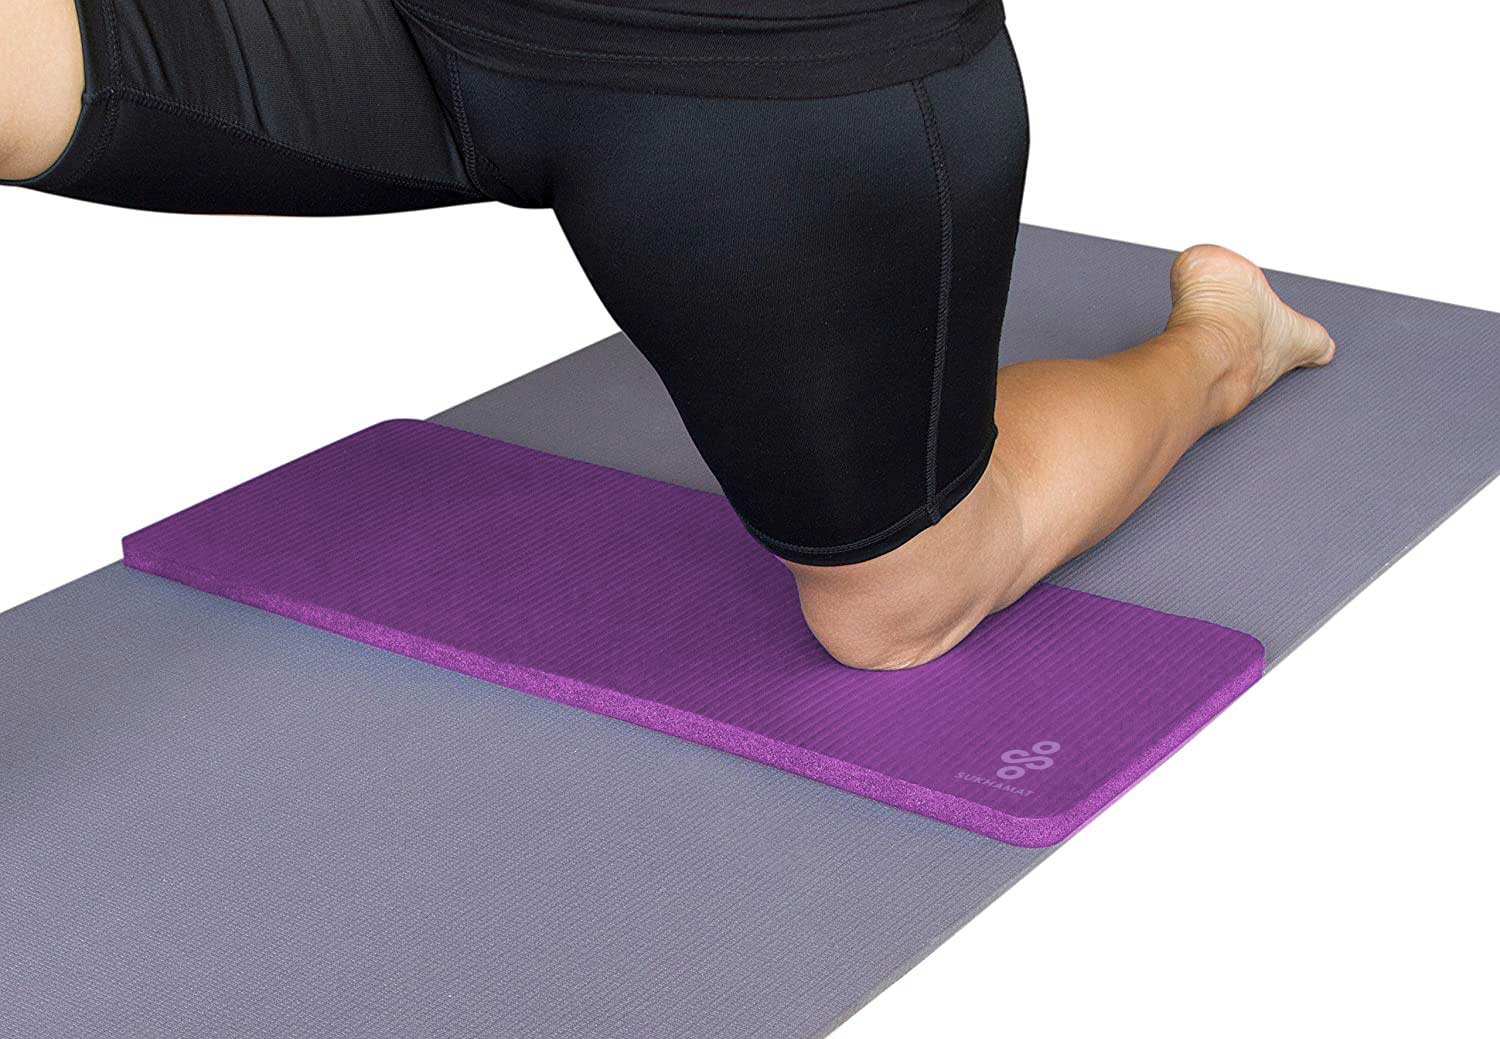 SukhaMat Yoga Knee Pad ✮ NEW! 15mm Thick ✮ The best yoga knee pad for a